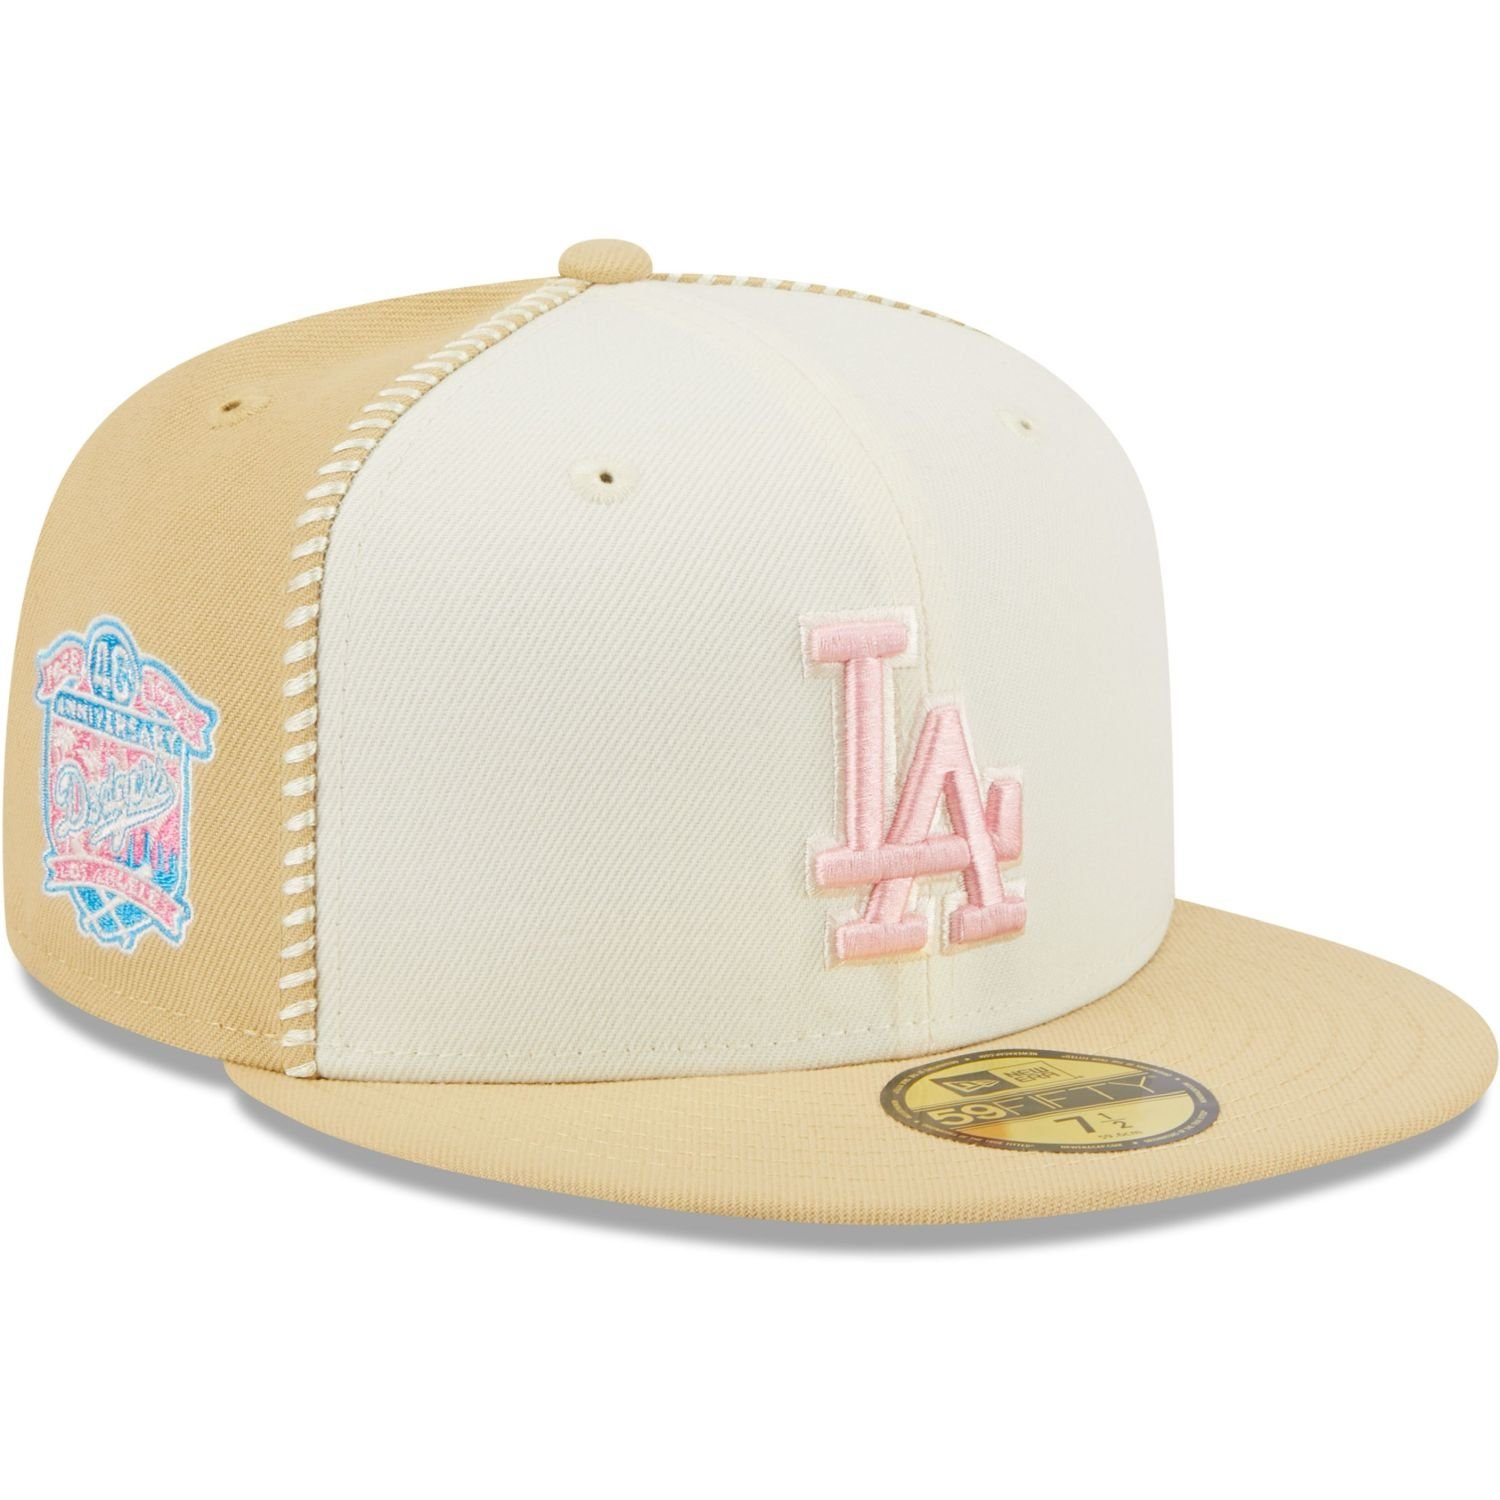 New Cap Angeles Los Fitted 59Fifty STITCH Dodgers SEAM Era